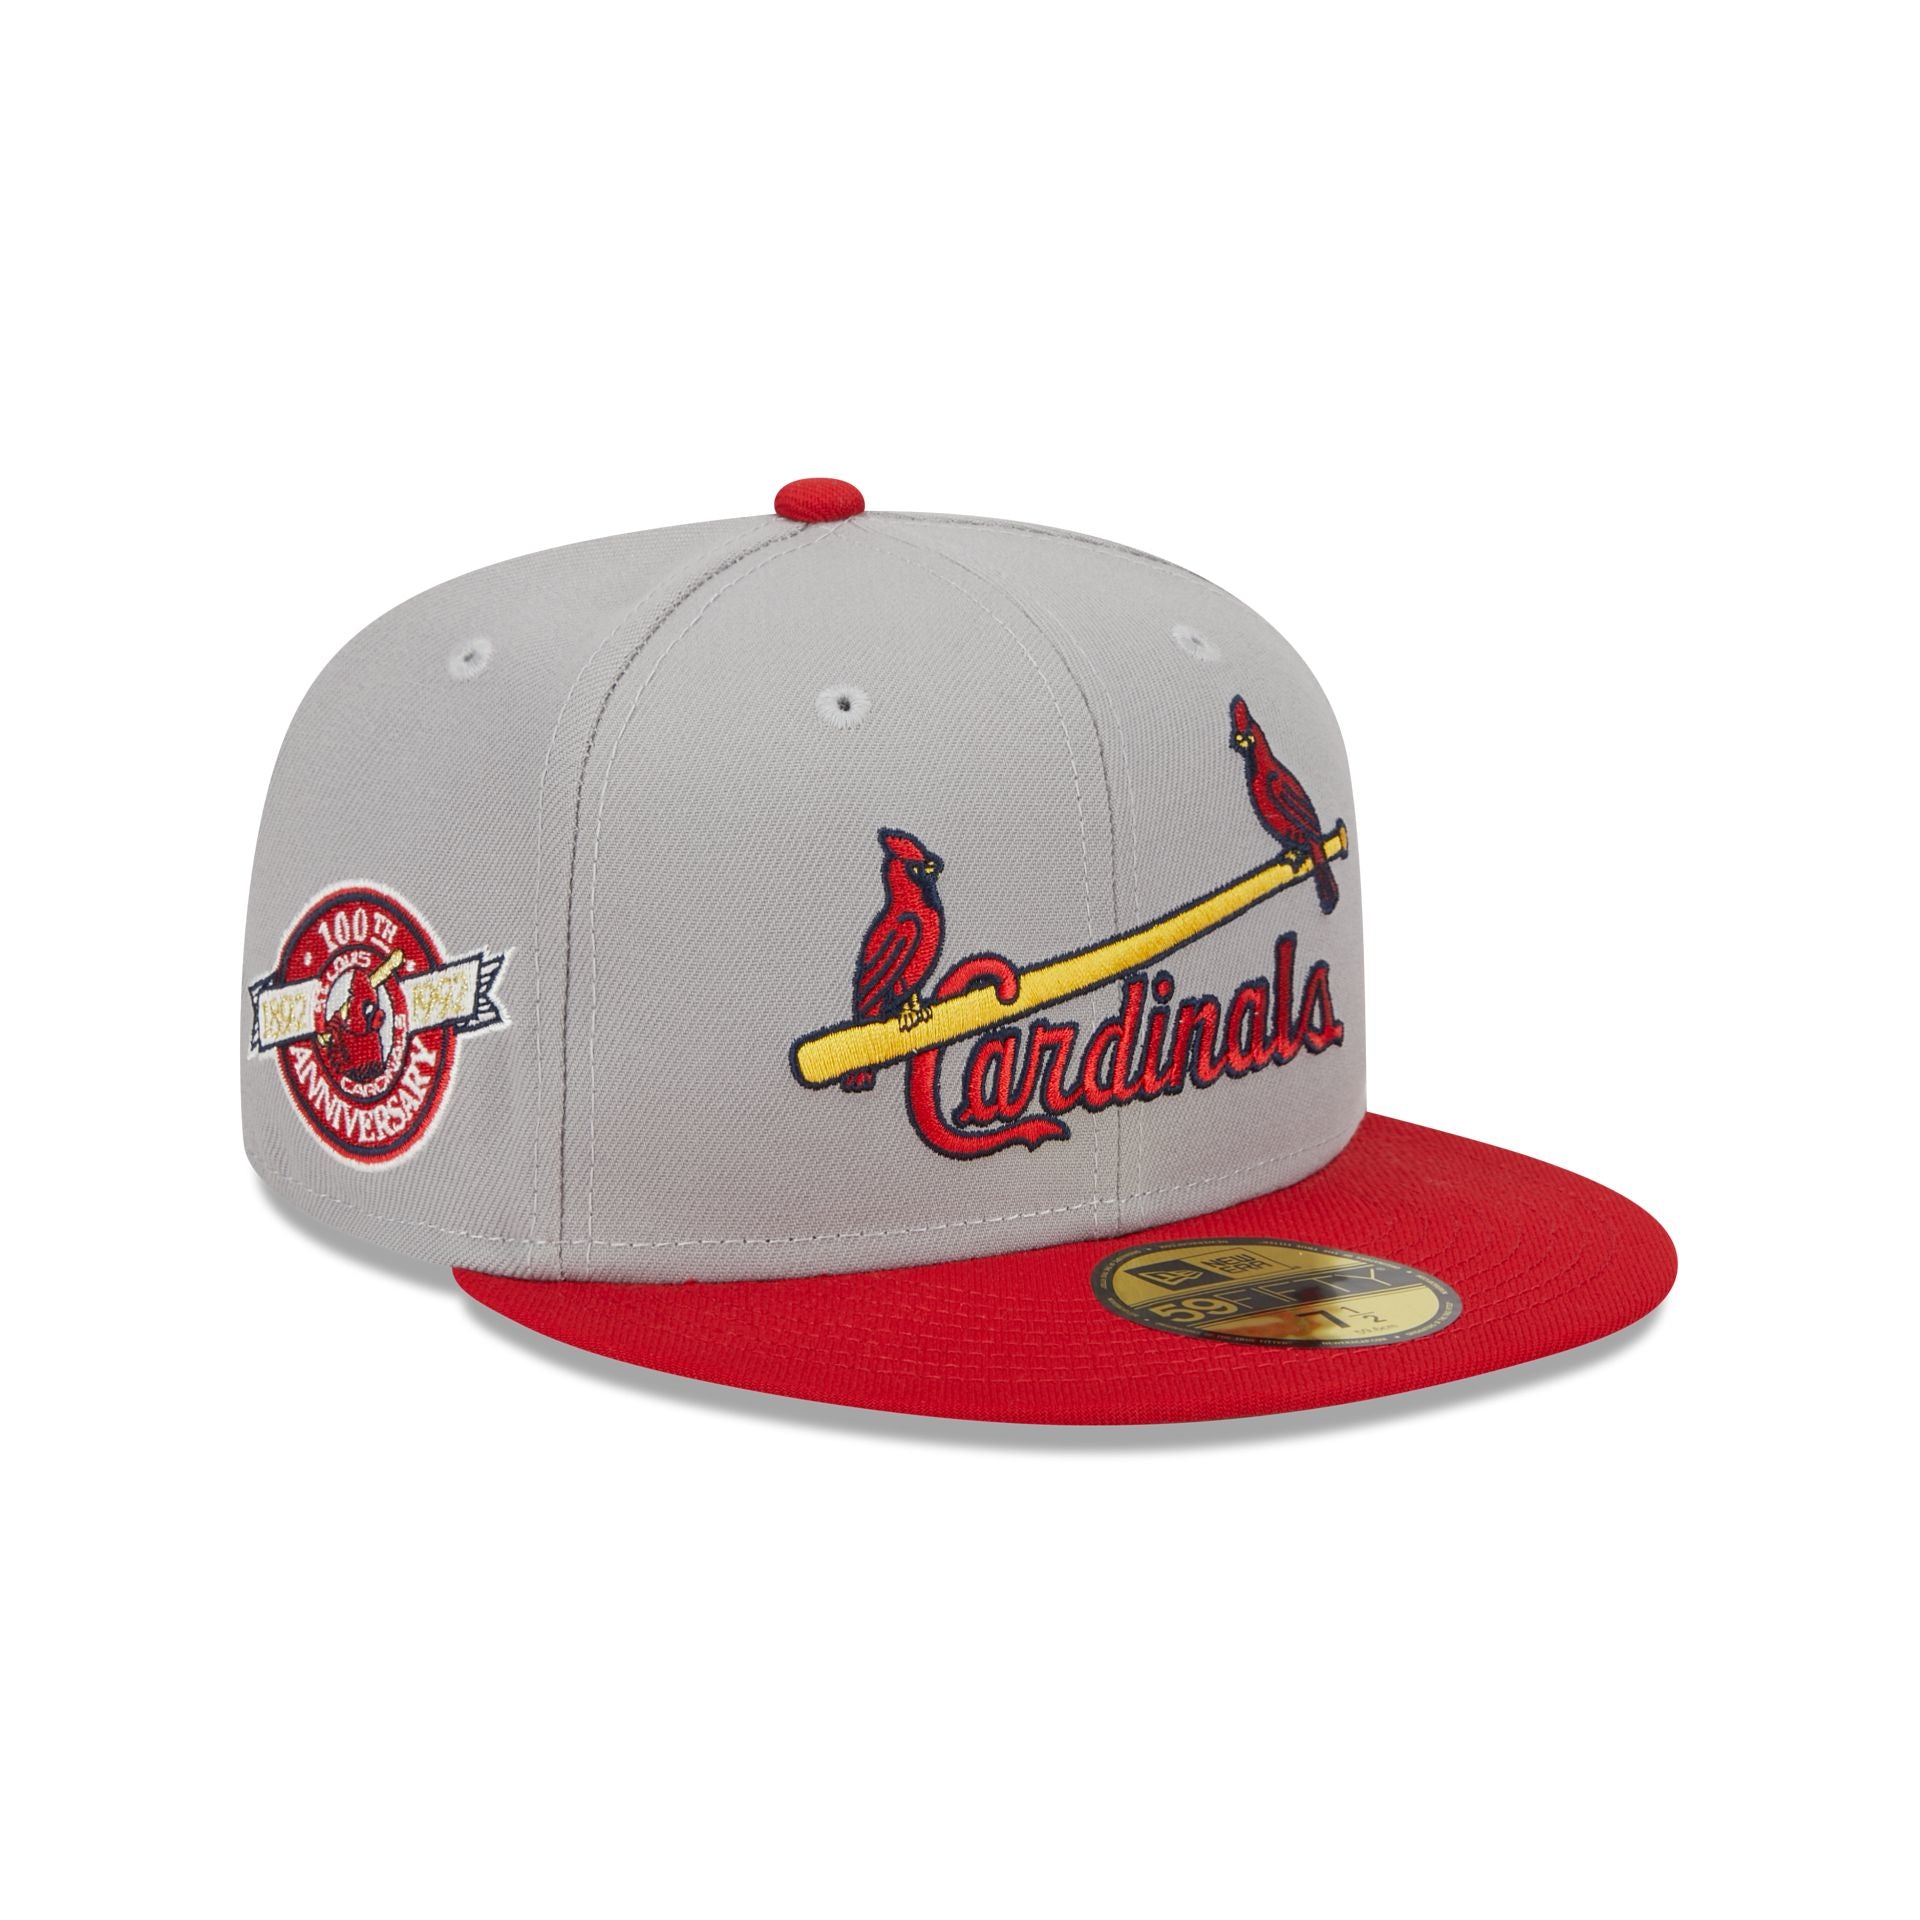 St. Louis Cardinals New Era Retro 59FIFTY Fitted Hat - Stone/Red